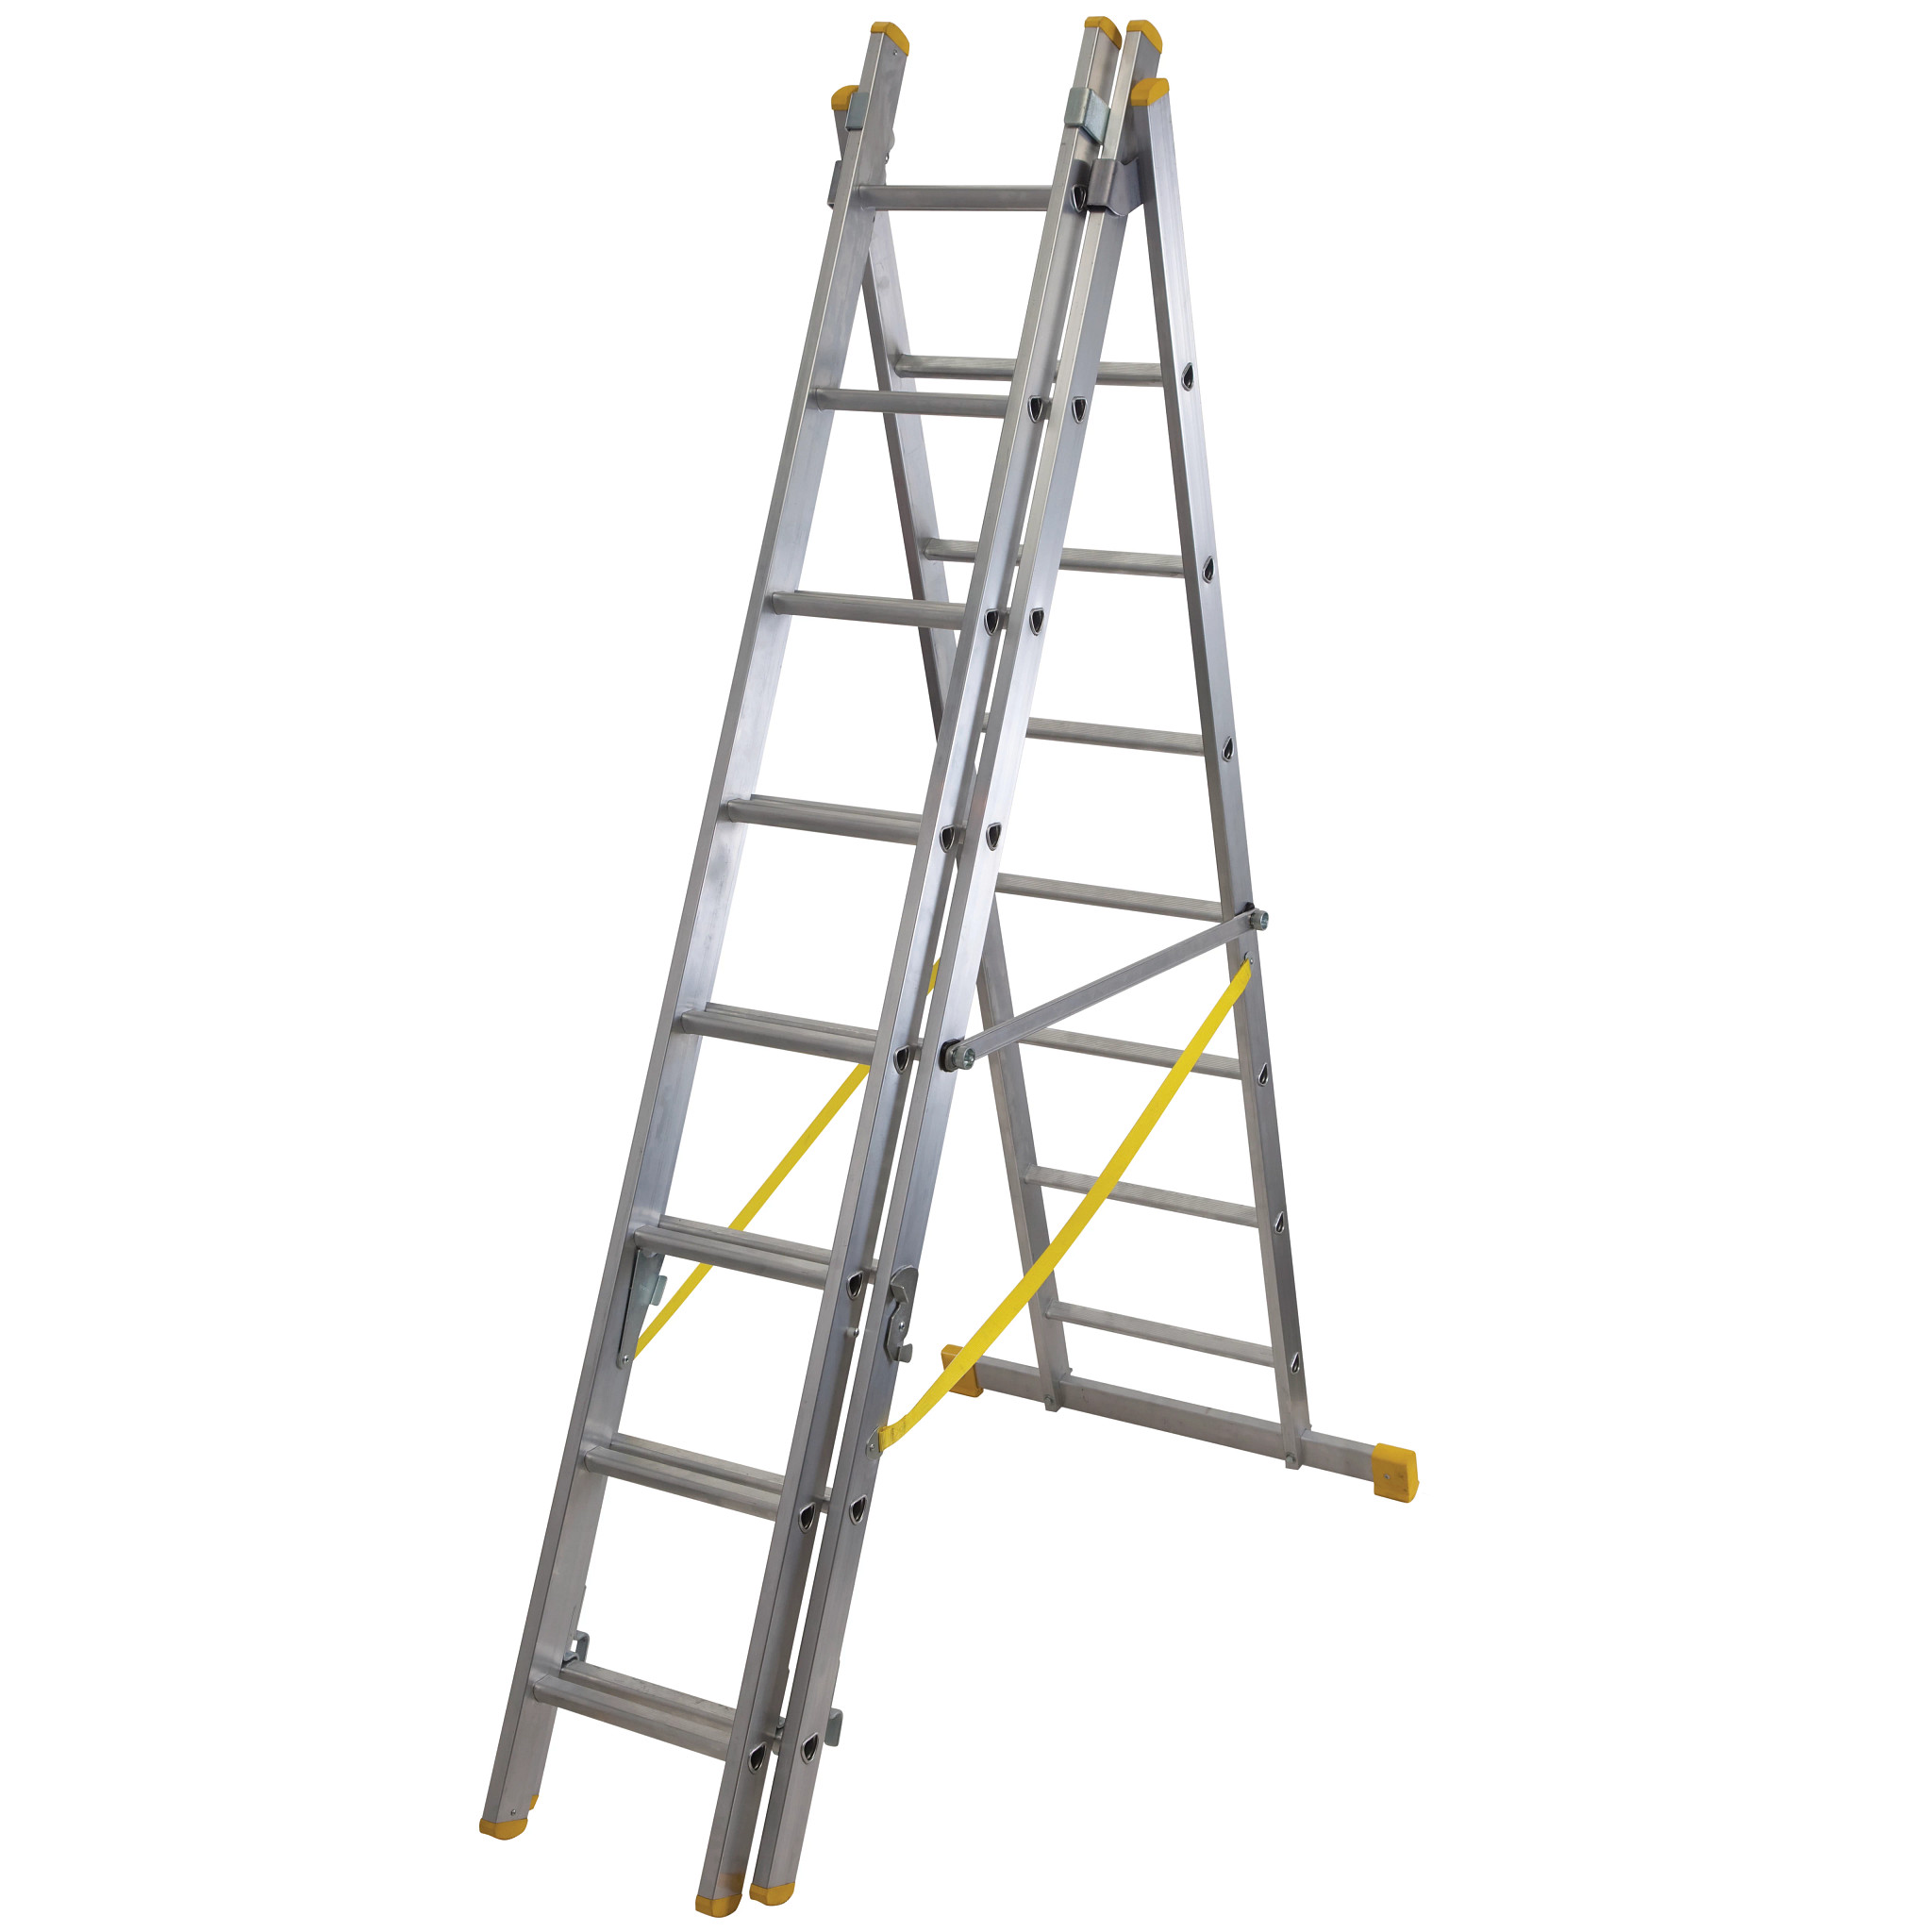 x4 Werner 725 Series Aluminium Box Section Triple Extension Plus Ladder New 